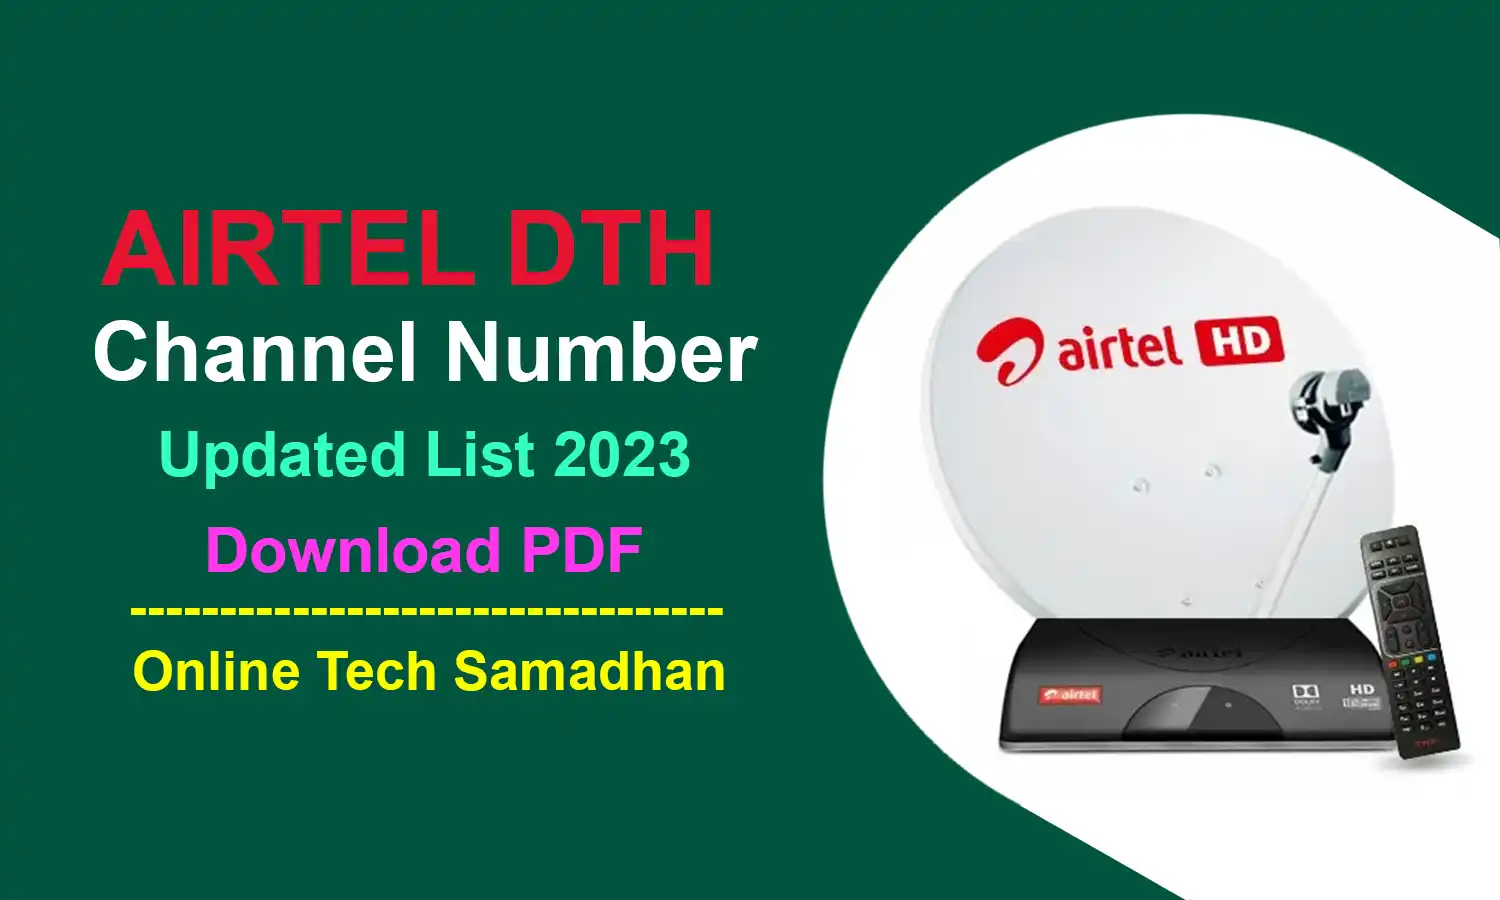 Airtel DTH Channel Number Airtel DTH Channel List